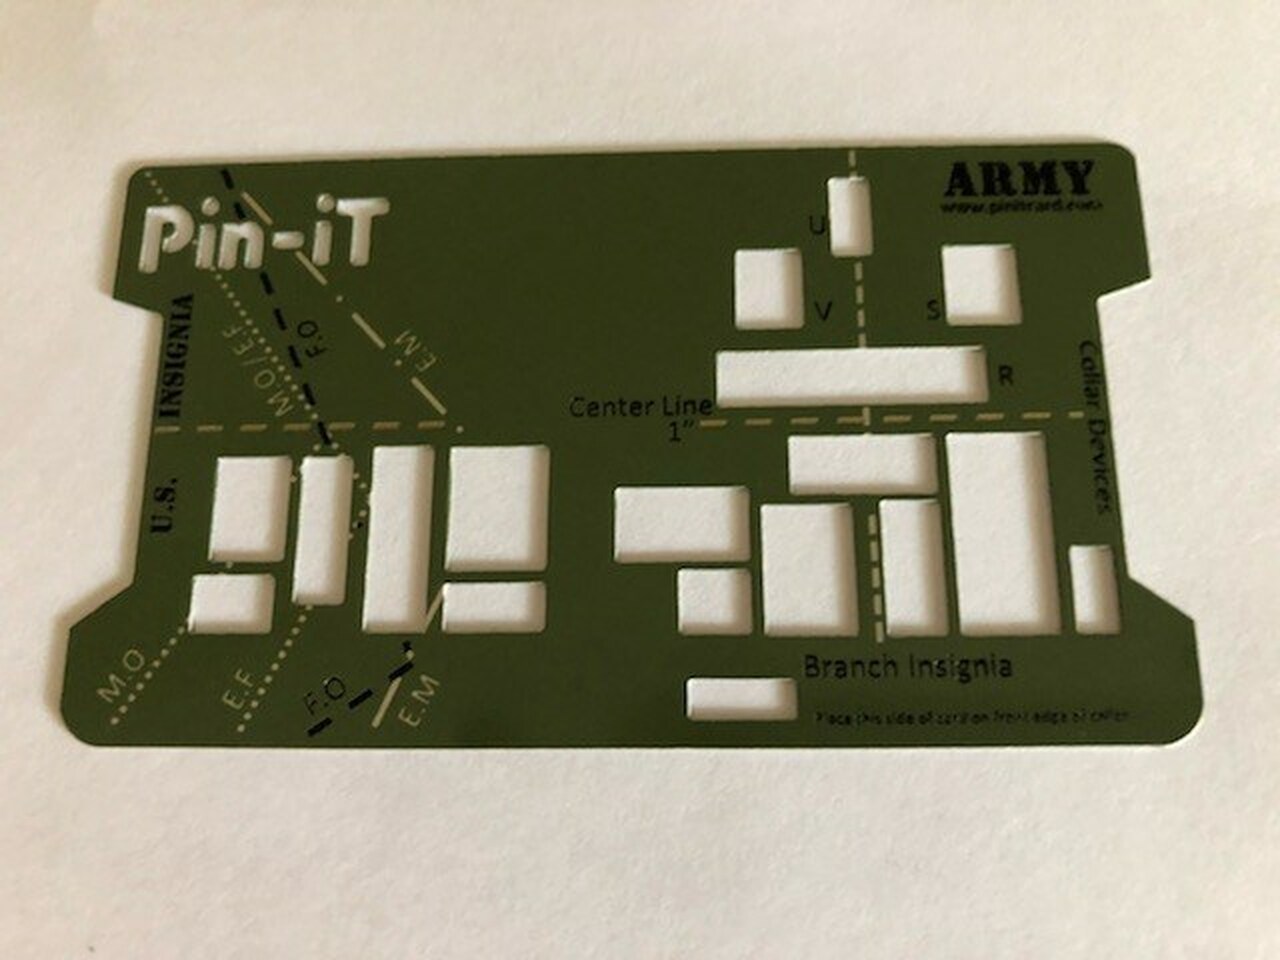 US Army Pin-iT Card, Army uniform Measuring tool | Make It Easier To Serve